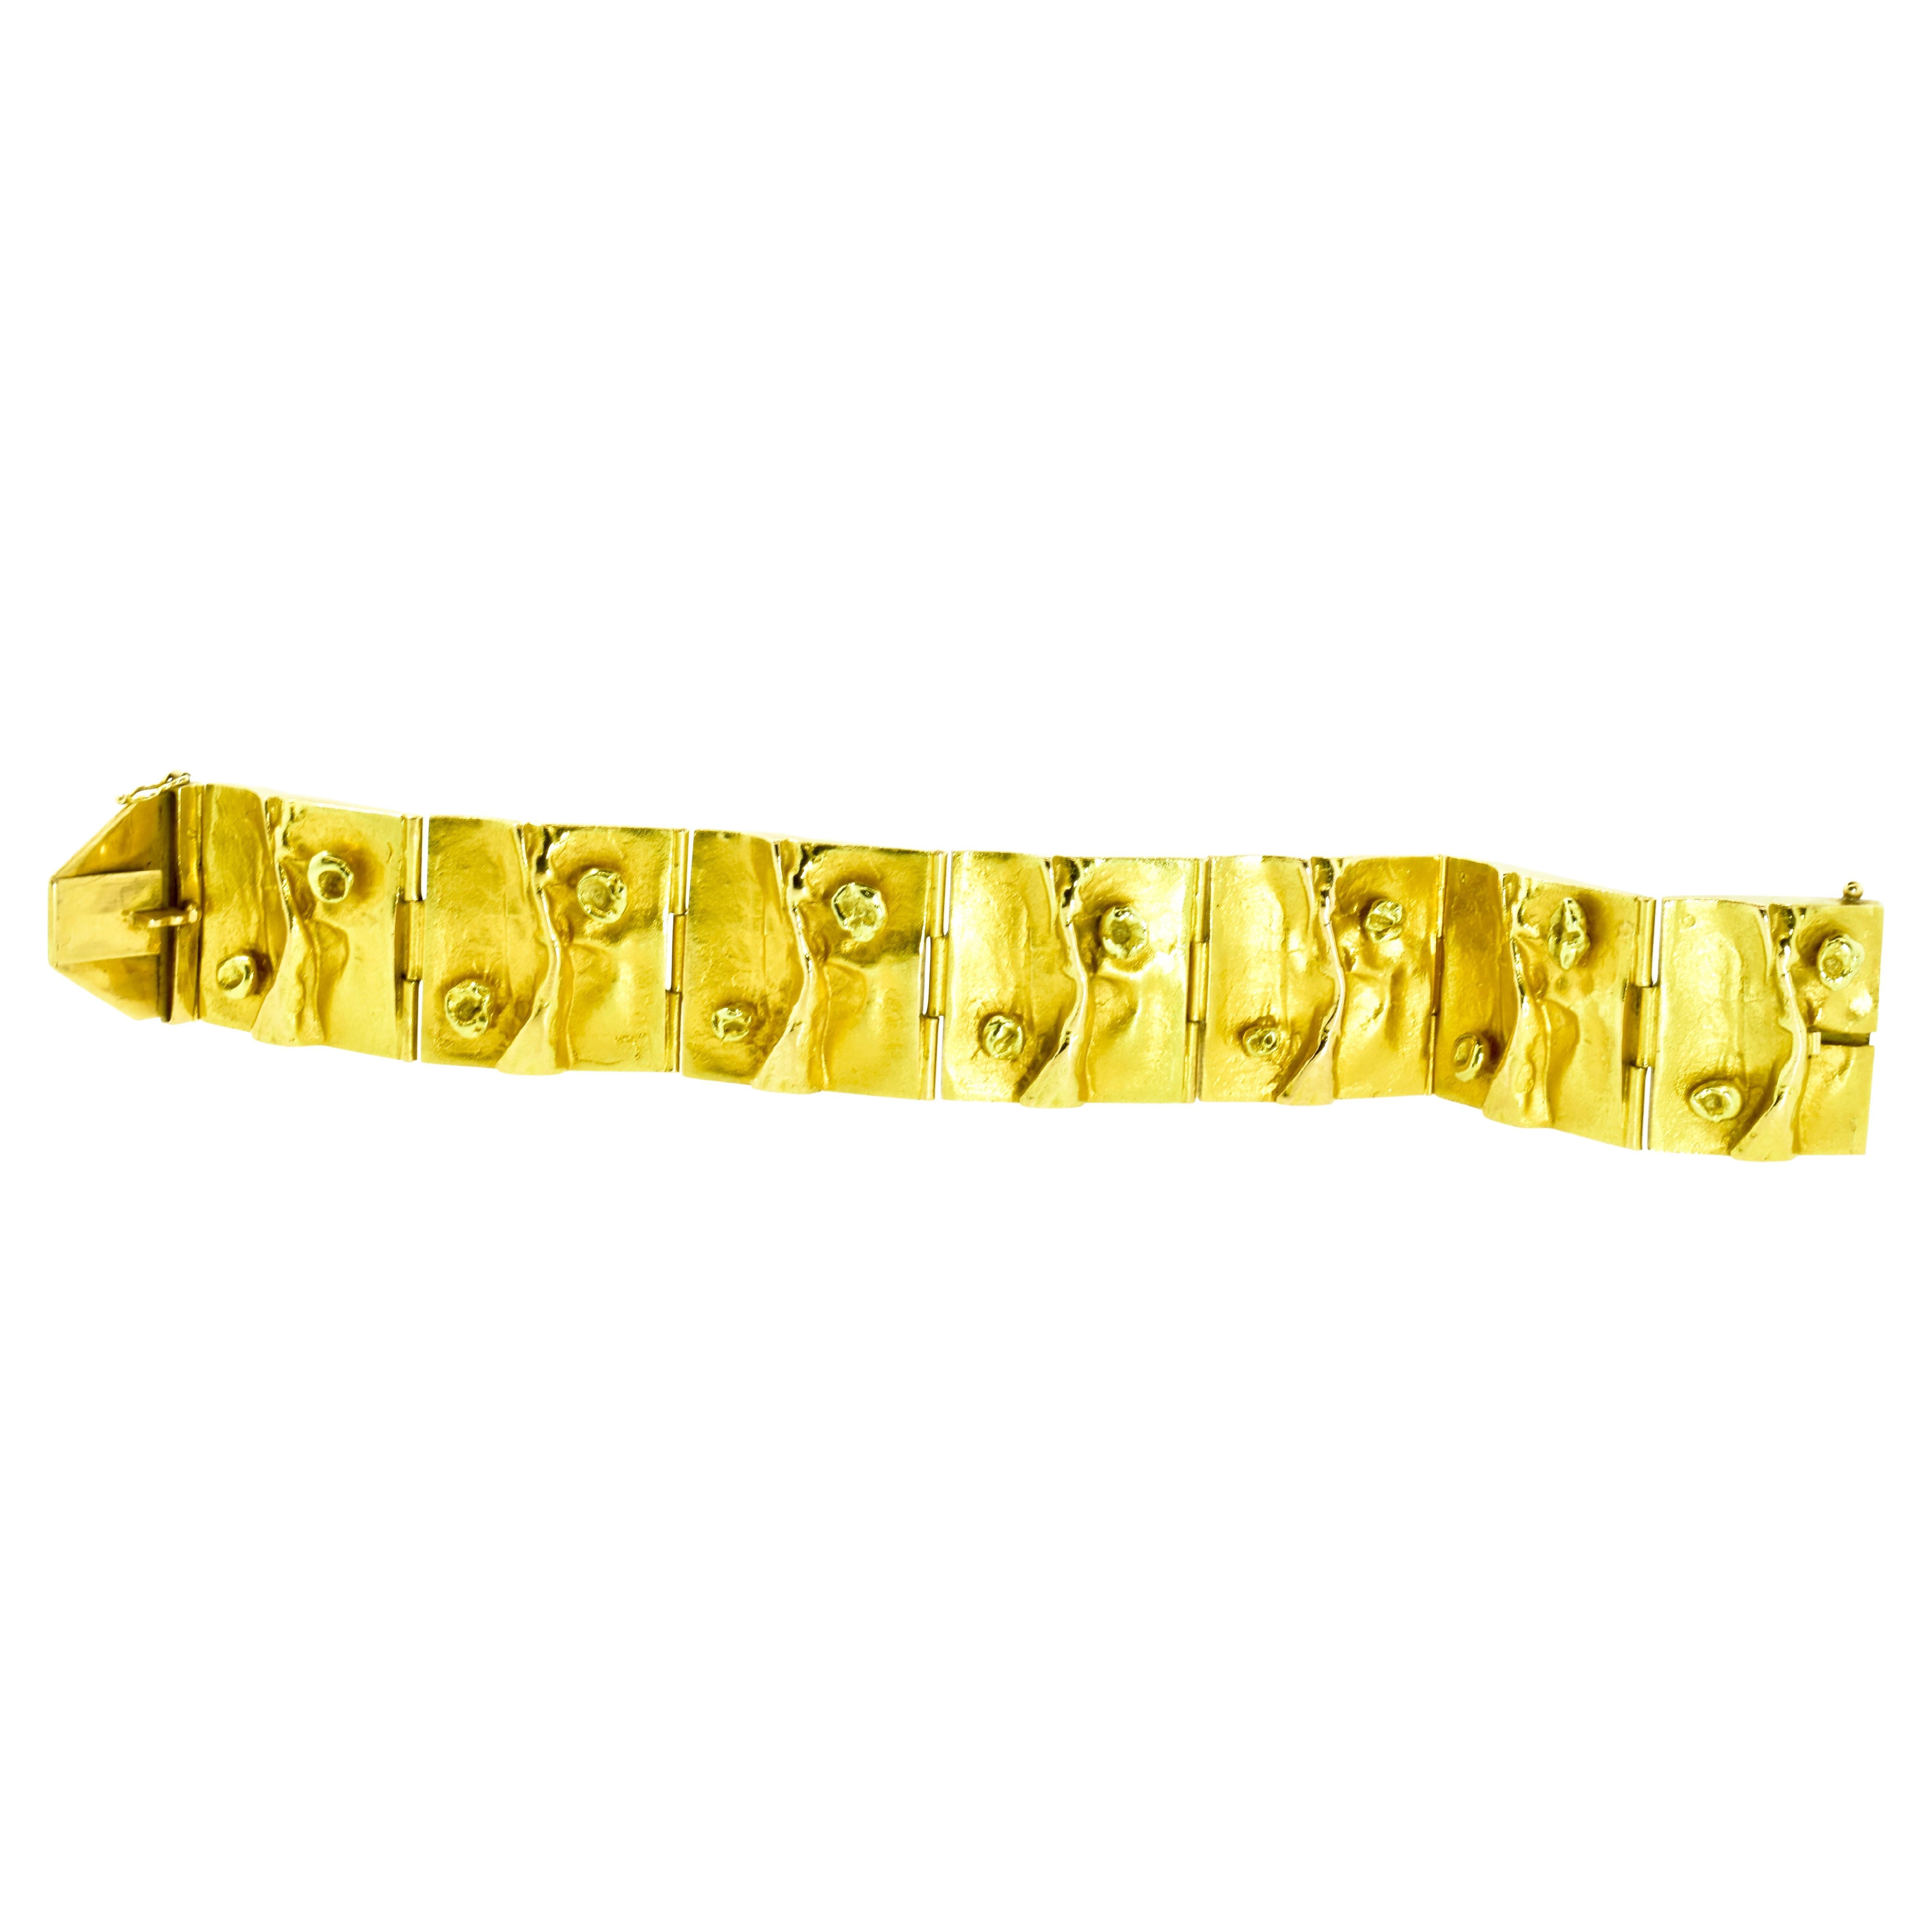 Bjorn Weckstrom 18K yellow gold modernist bracelet.  This handmade bracelet by one of Finland's grand master jewelers. This bracelet is one of his most famous designs.  A very similar necklace and bracelet was worn by Carrie Fisher in the movie Star